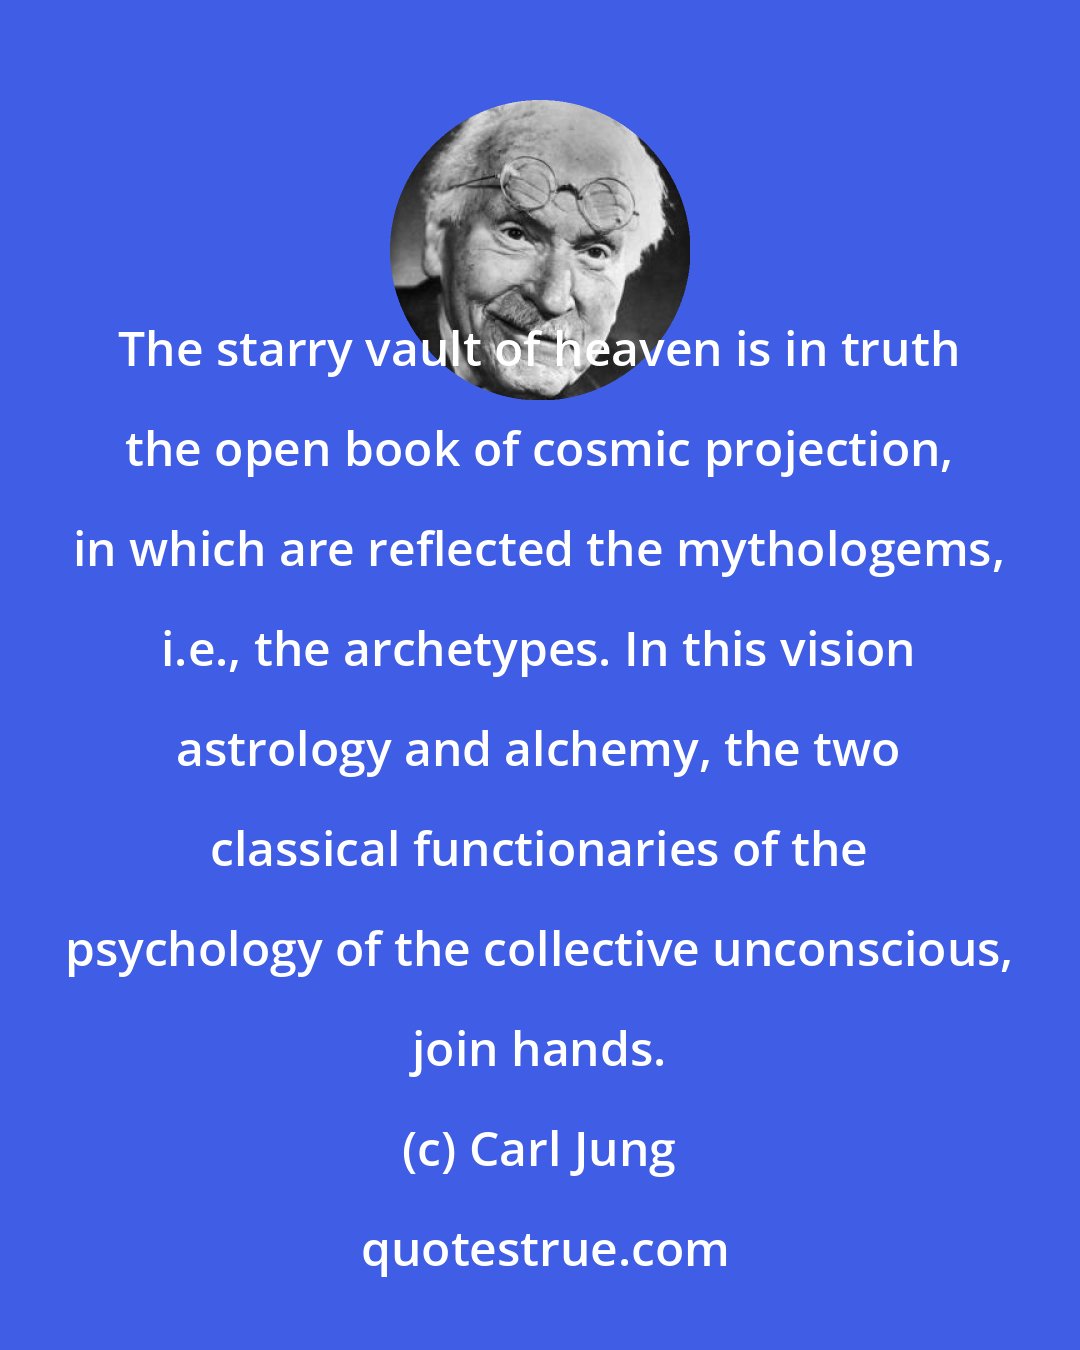 Carl Jung: The starry vault of heaven is in truth the open book of cosmic projection, in which are reflected the mythologems, i.e., the archetypes. In this vision astrology and alchemy, the two classical functionaries of the psychology of the collective unconscious, join hands.